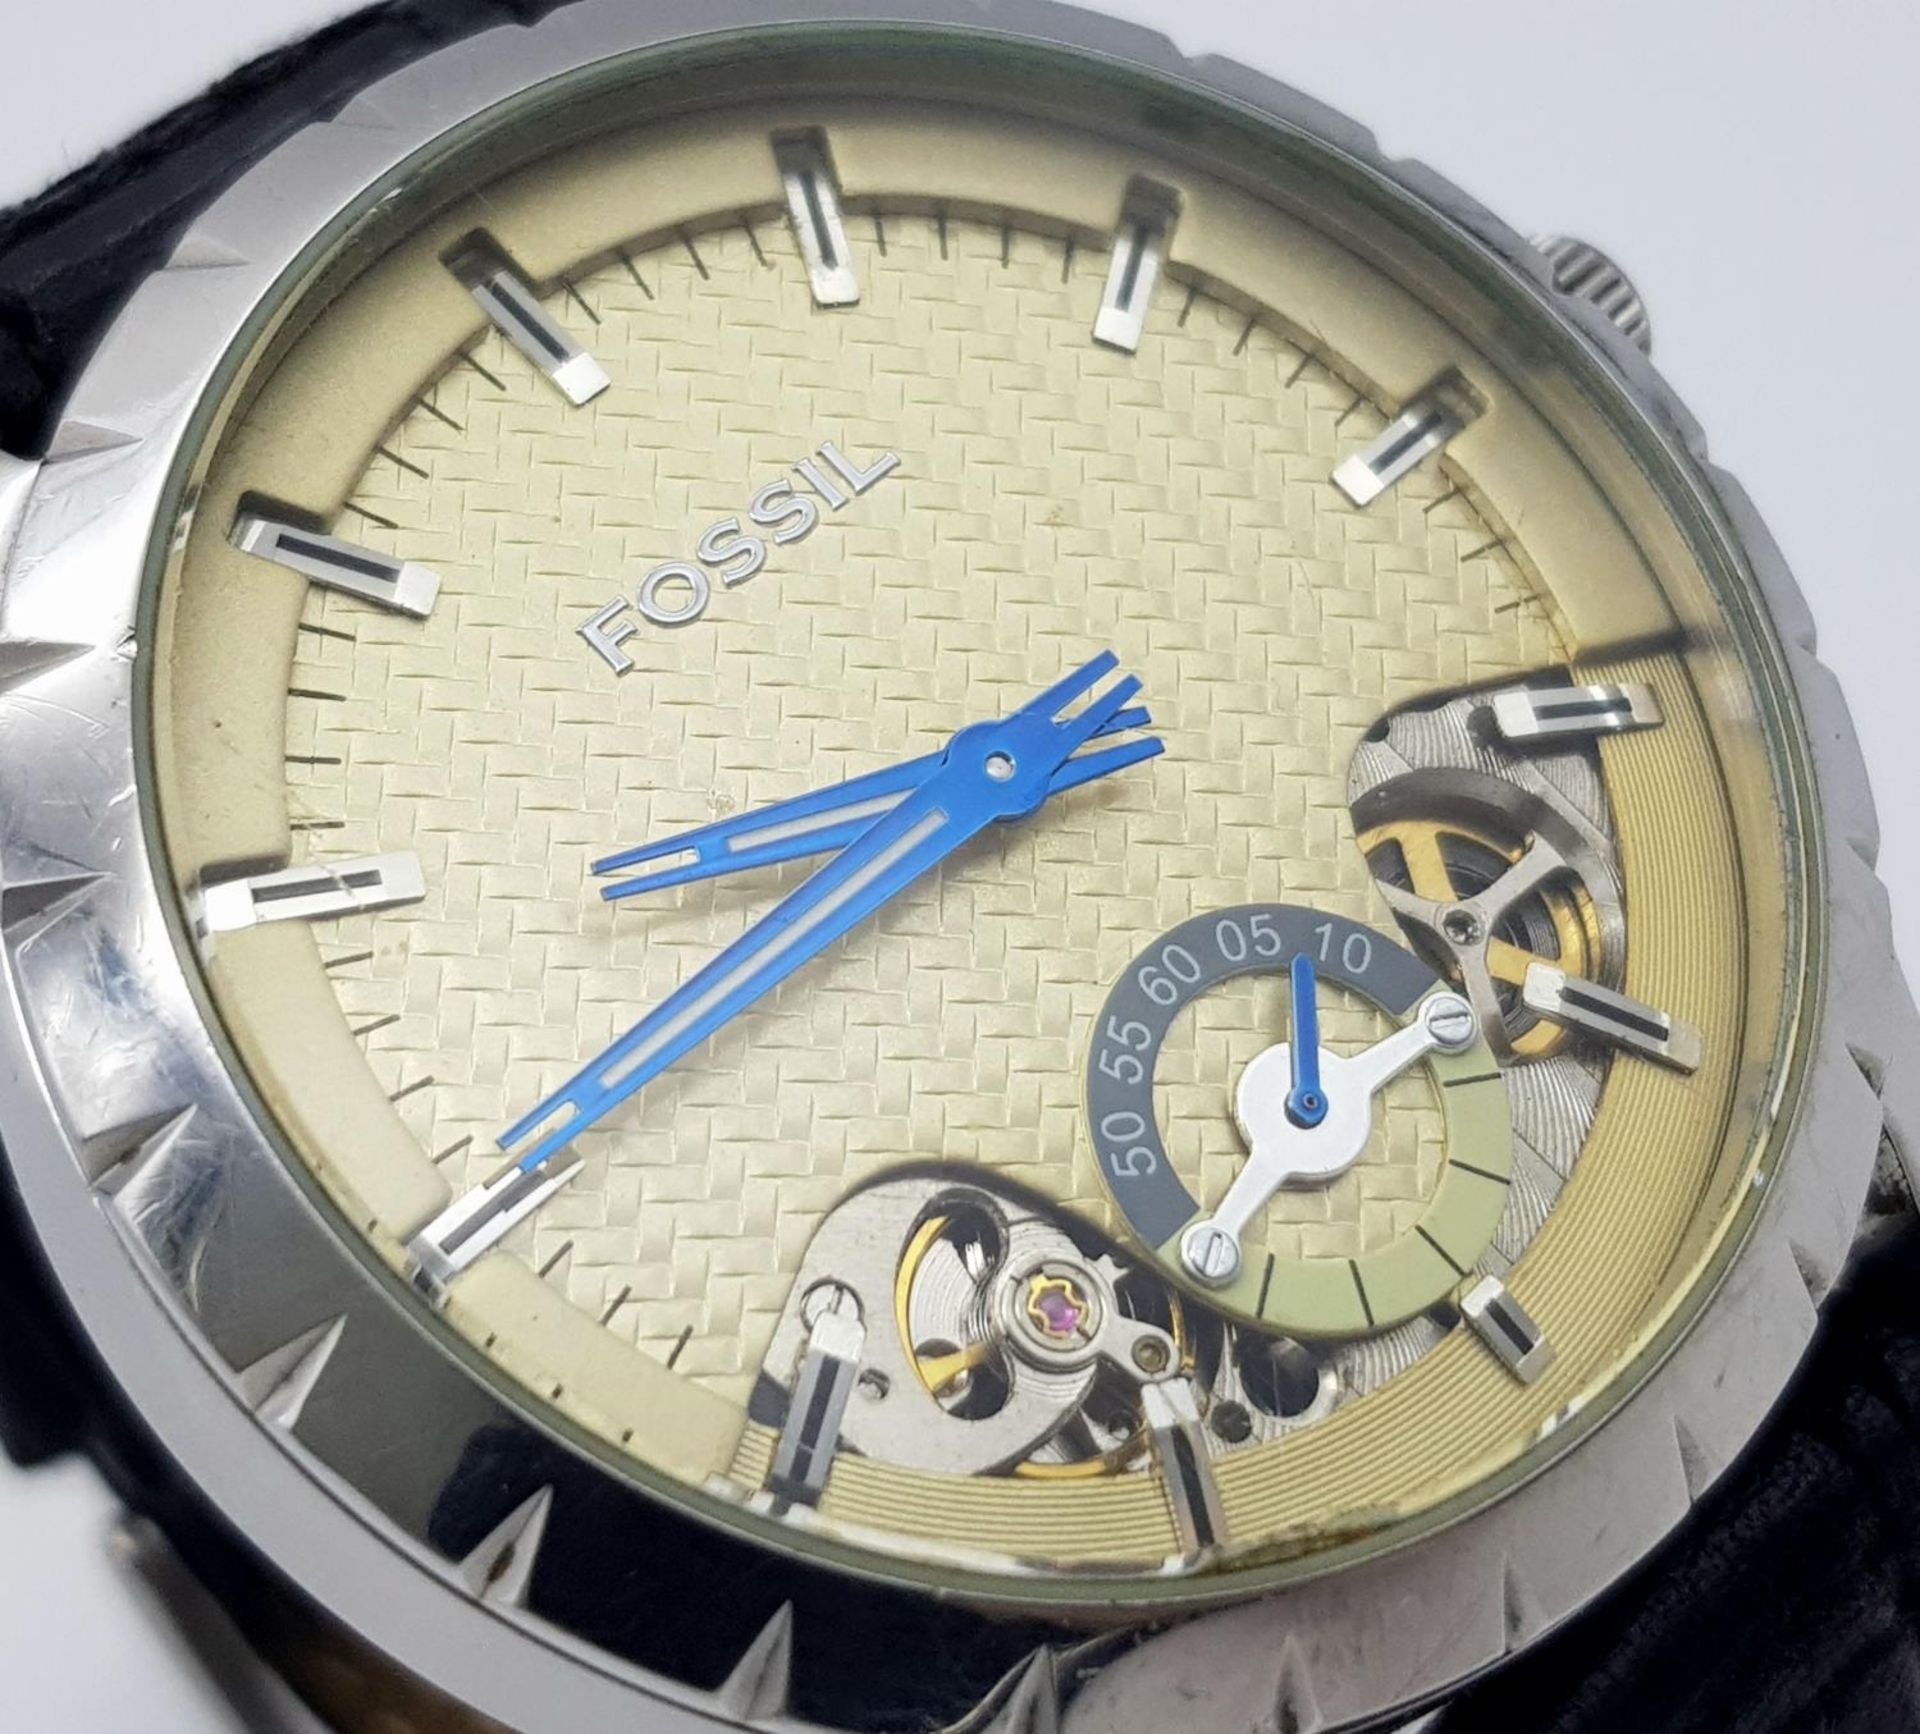 A Large Cased Fossil Automatic Gents Watch. Black leather strap. Stainless steel case - 48mm. Yellow - Image 3 of 5